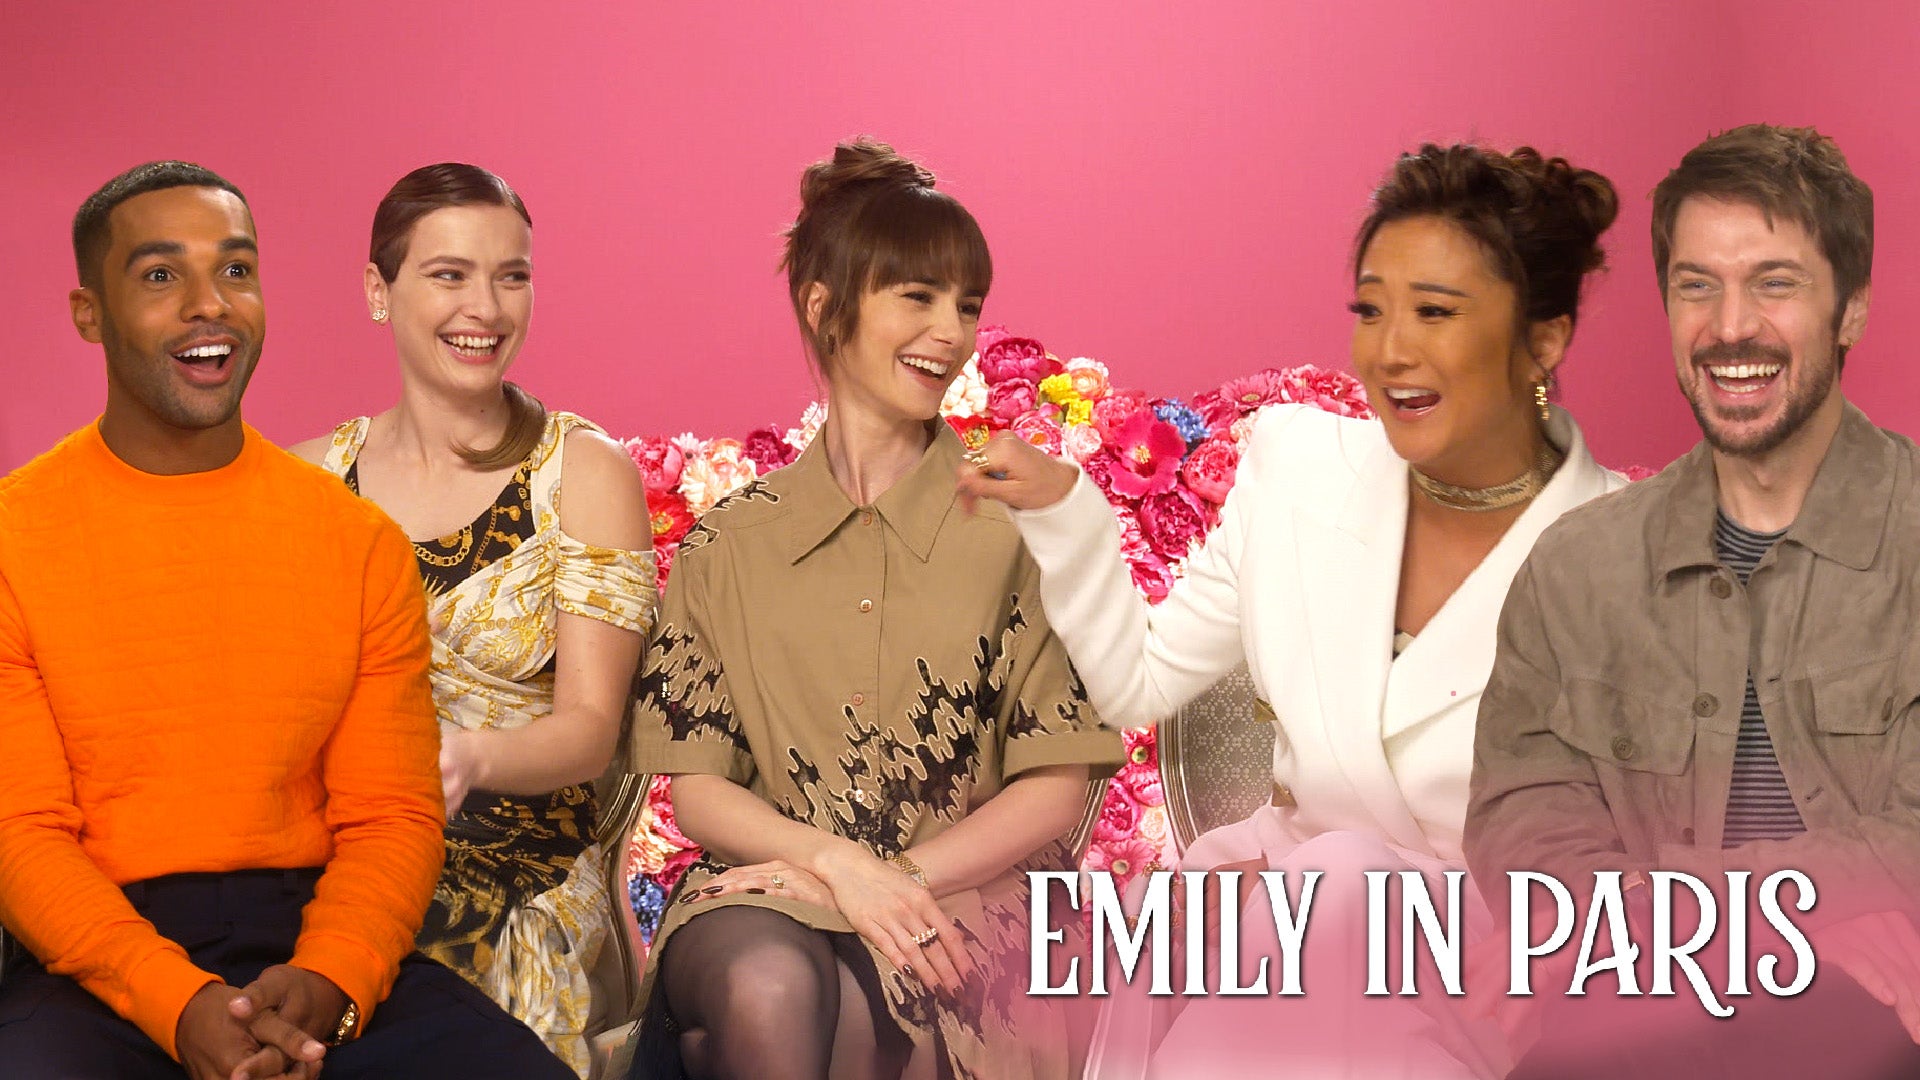 When does Emily in Paris season 3 come out?